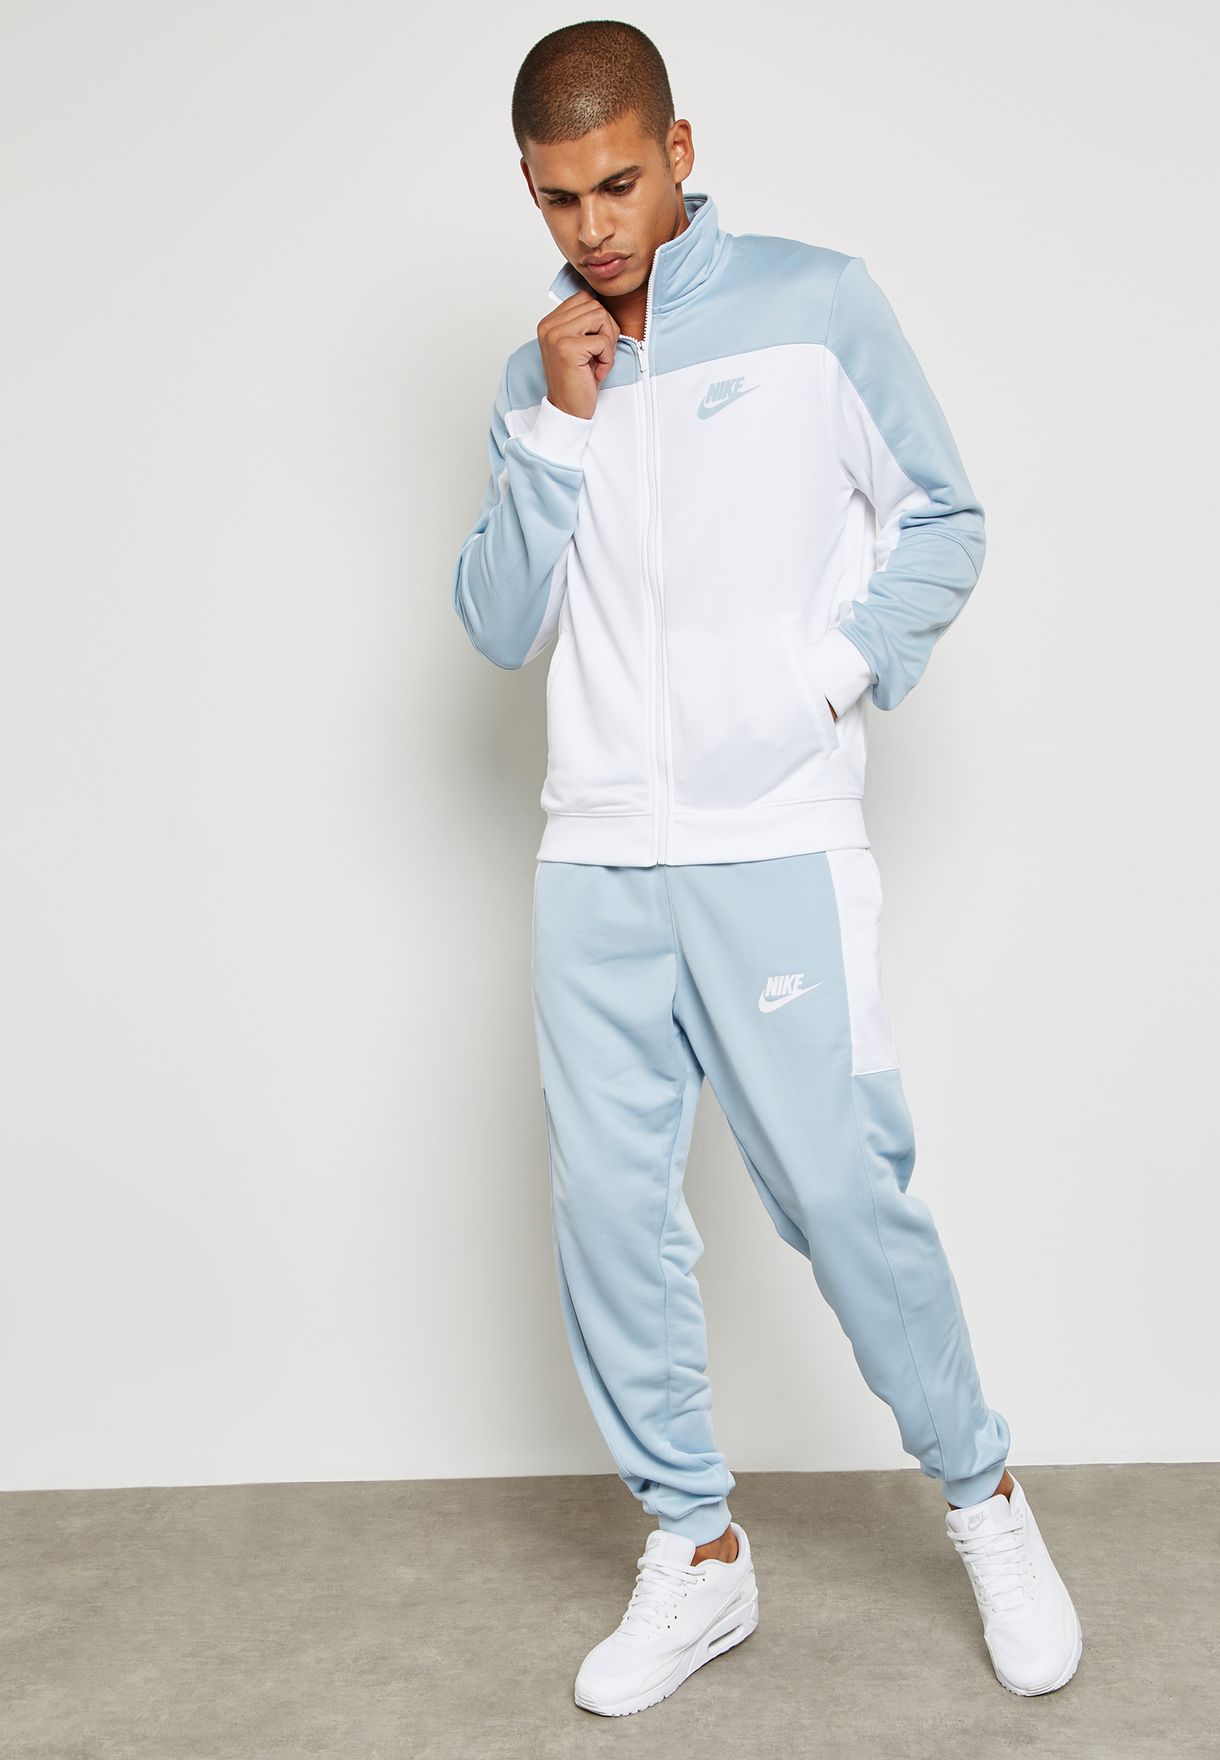 Buy Nike multicolor Logo Tracksuit for 